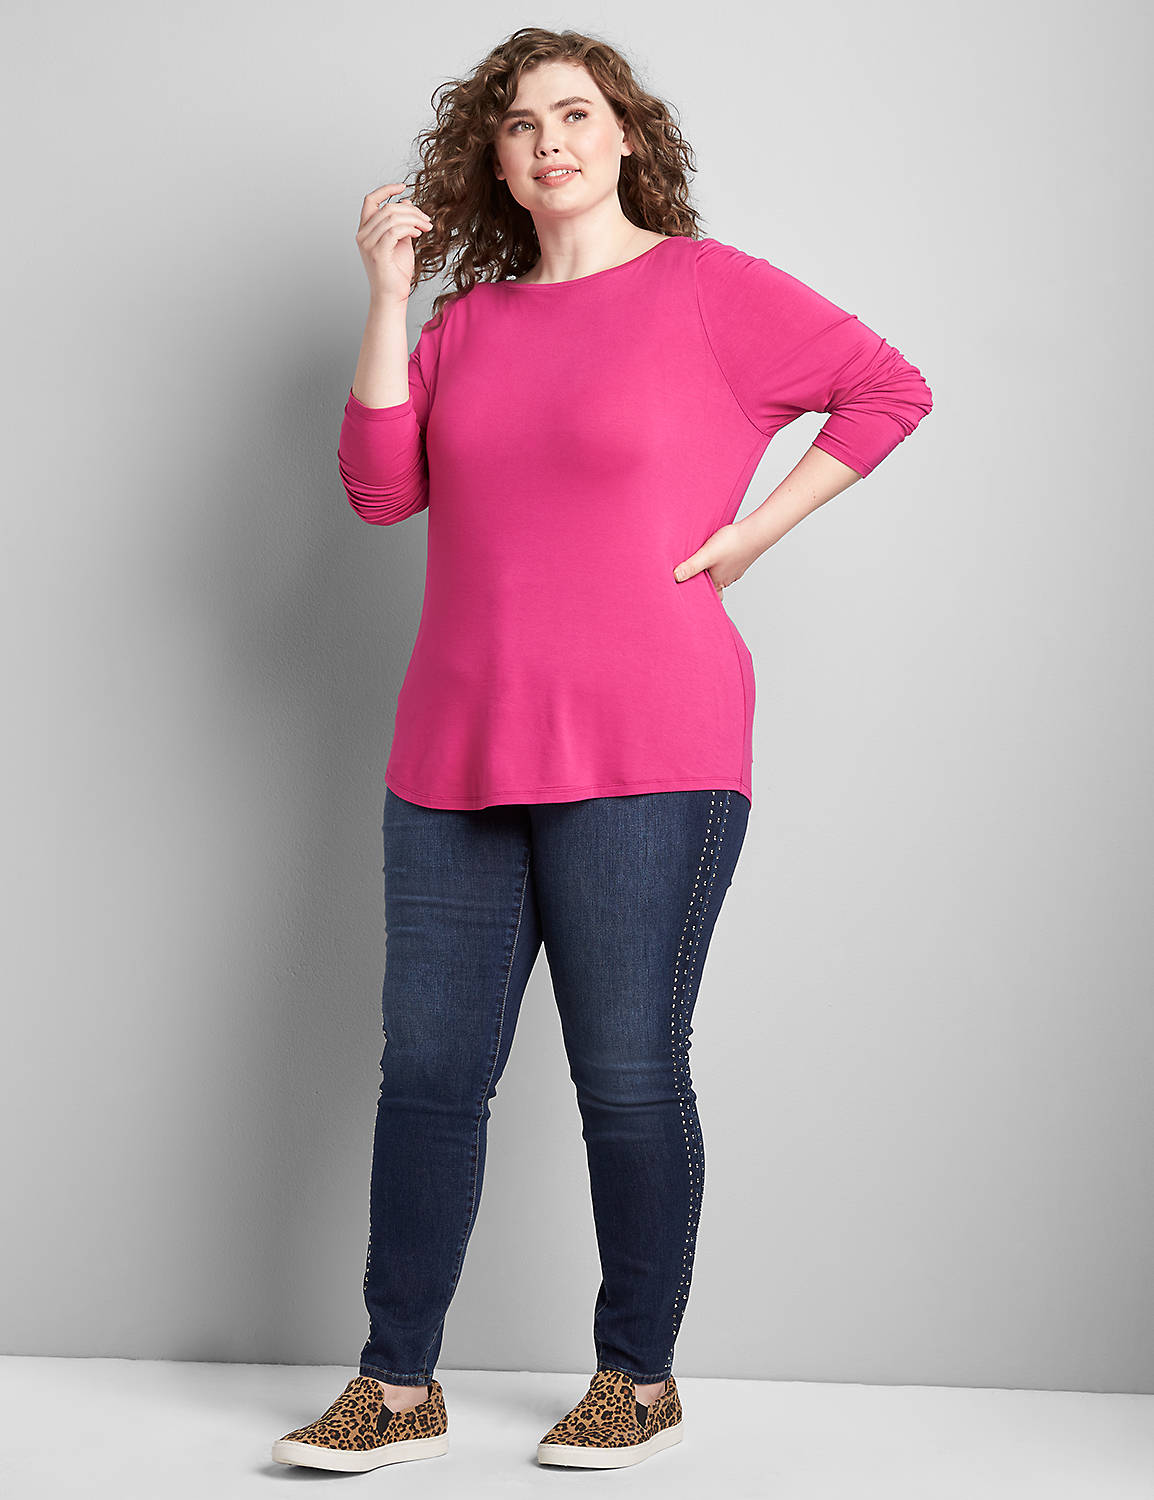 Long Sleeve Boat Neck Curved Hem Printed Tee 1122445 copy of 1122437:PANTONE Fuchsia Red:10/12 Product Image 3